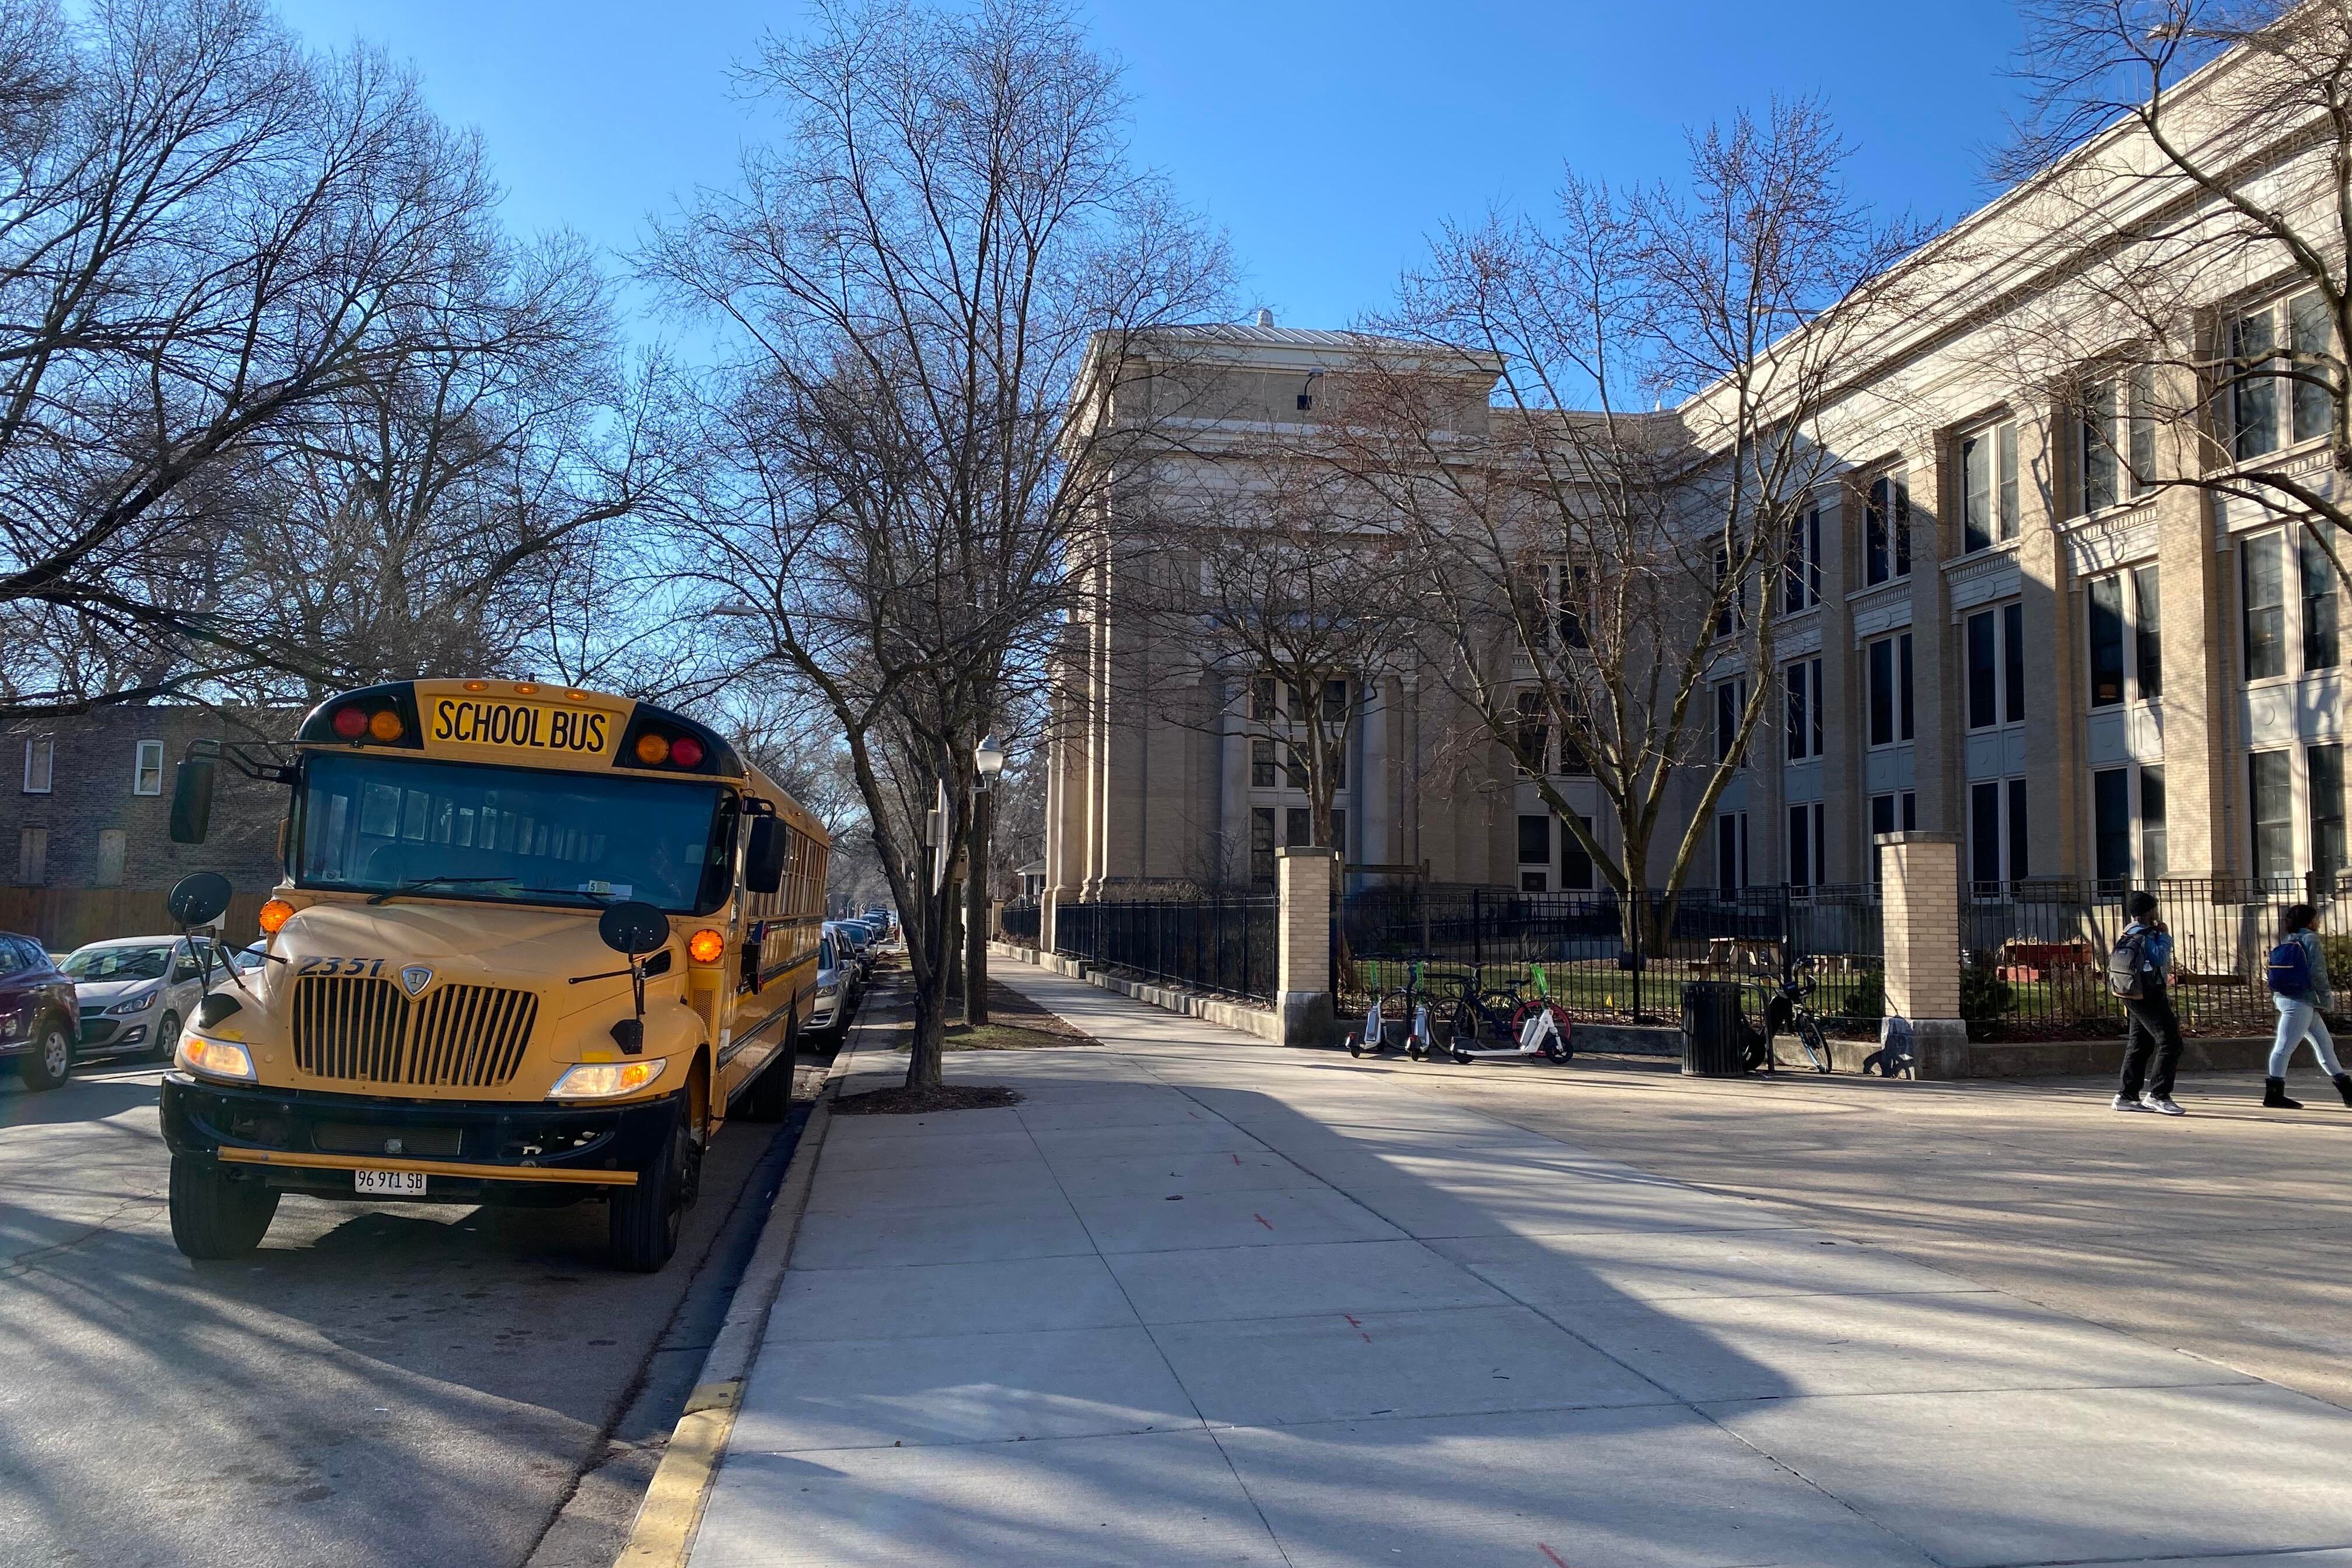 A yellow school bus is parked outside of a large stone building with a large sidewalk in the foreground and blue sky in the background.